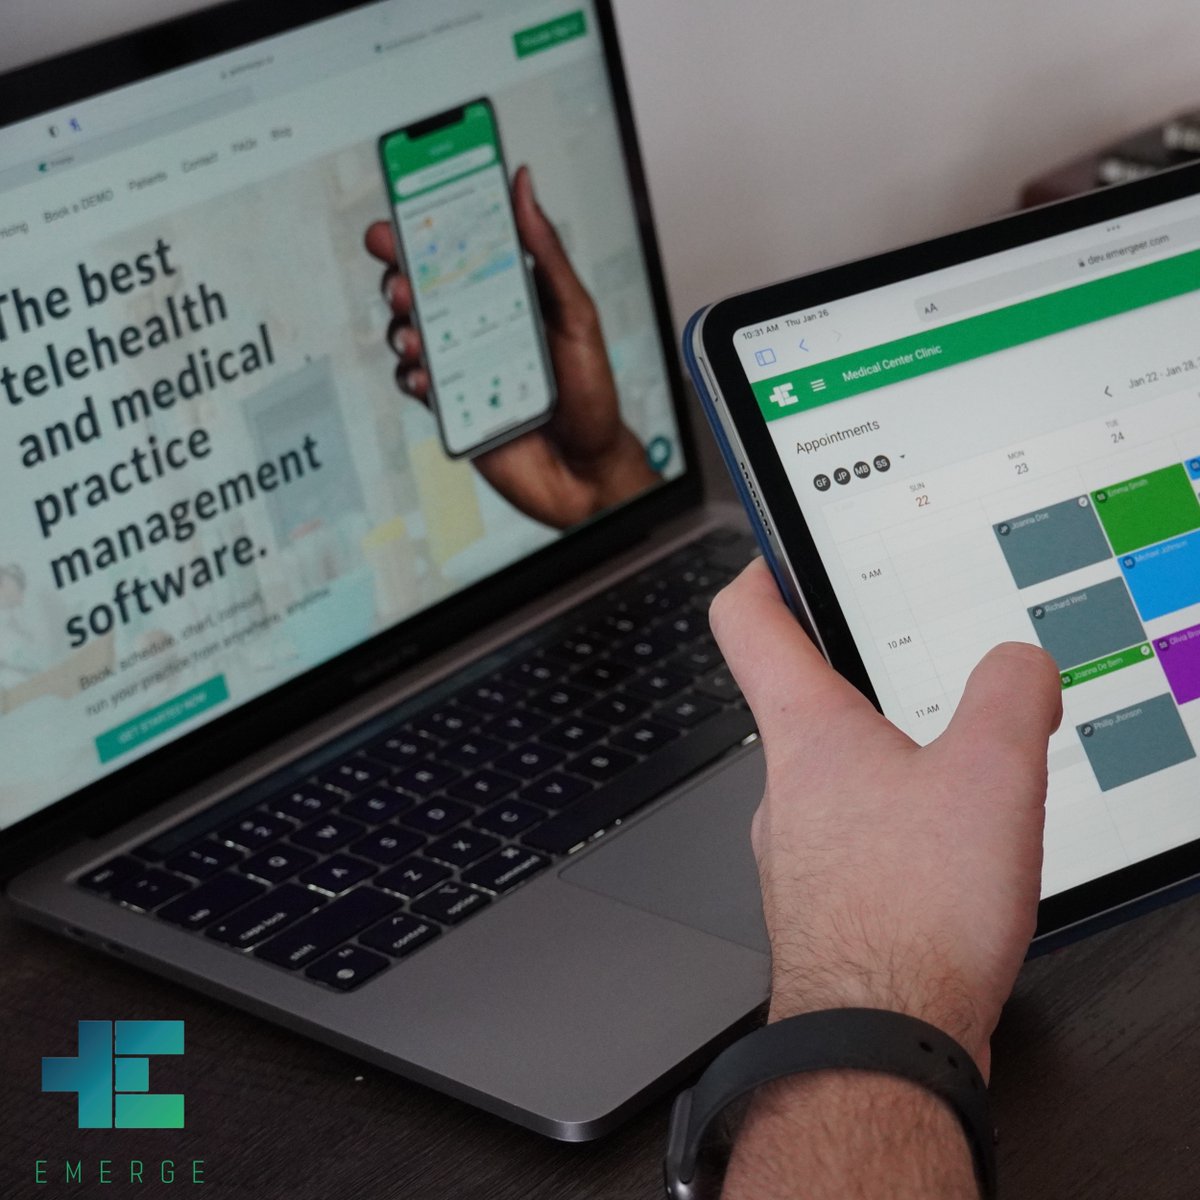 Maximize your time and resources by streamlining your practice with EMERGE. Our platform offers virtual consultations, online booking, automated scheduling, and patient reminders. Plus, EMERGE is fully PHIPA compliant. #telemedicine #practiceefficiency